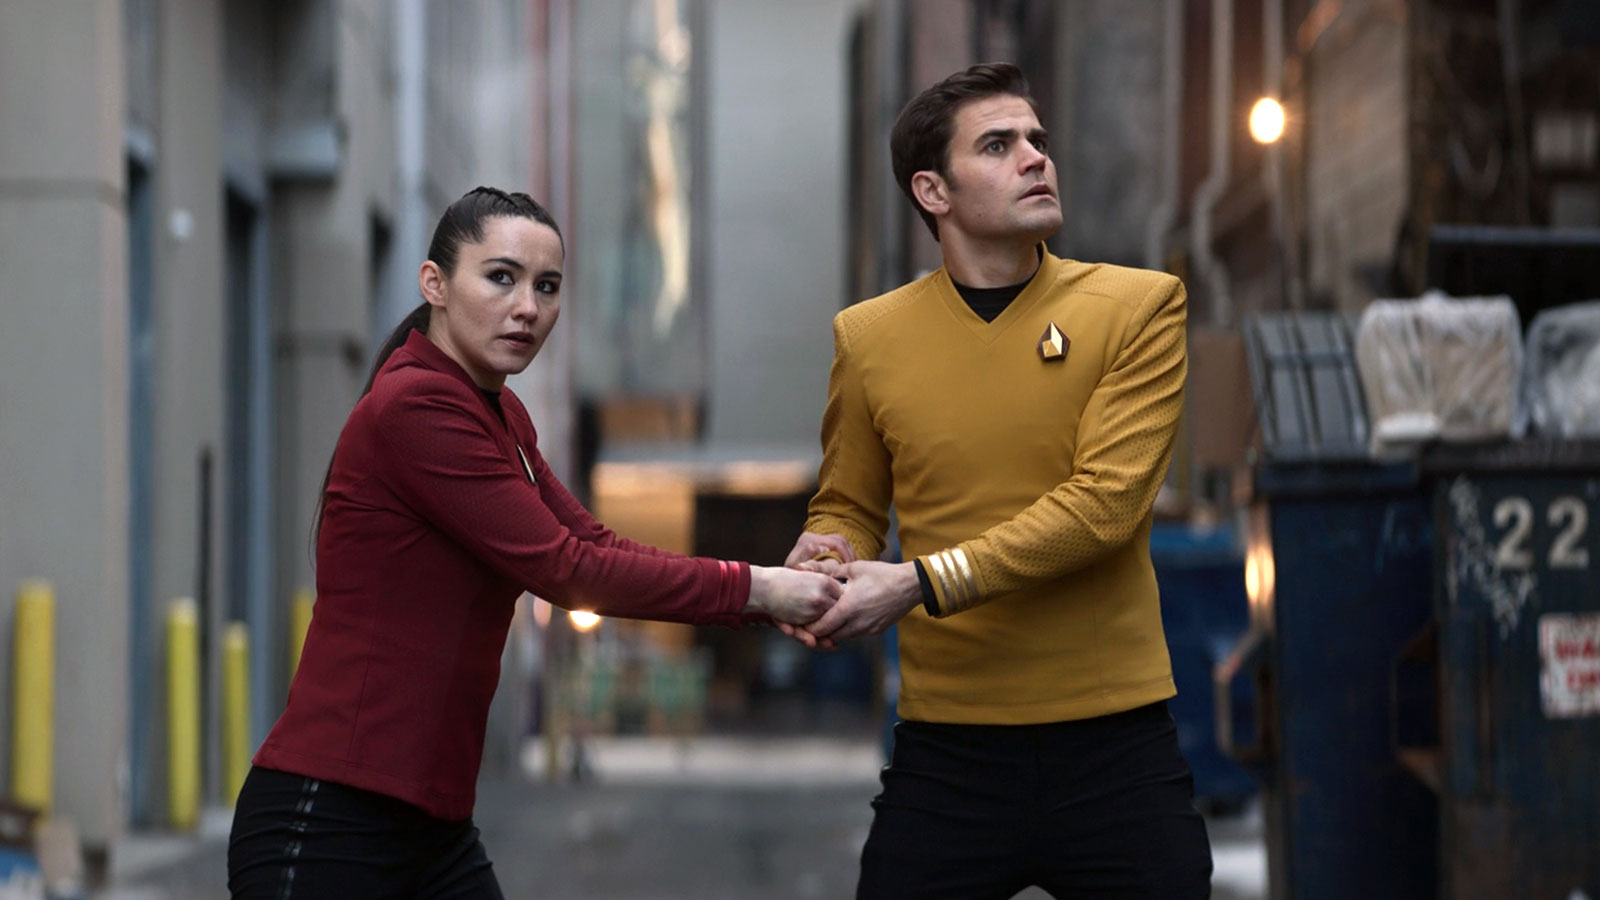 Star Trek: Strange New Worlds 203 “Tomorrow and Tomorrow and Tomorrow” Review: A strong character study hindered by a weak plot